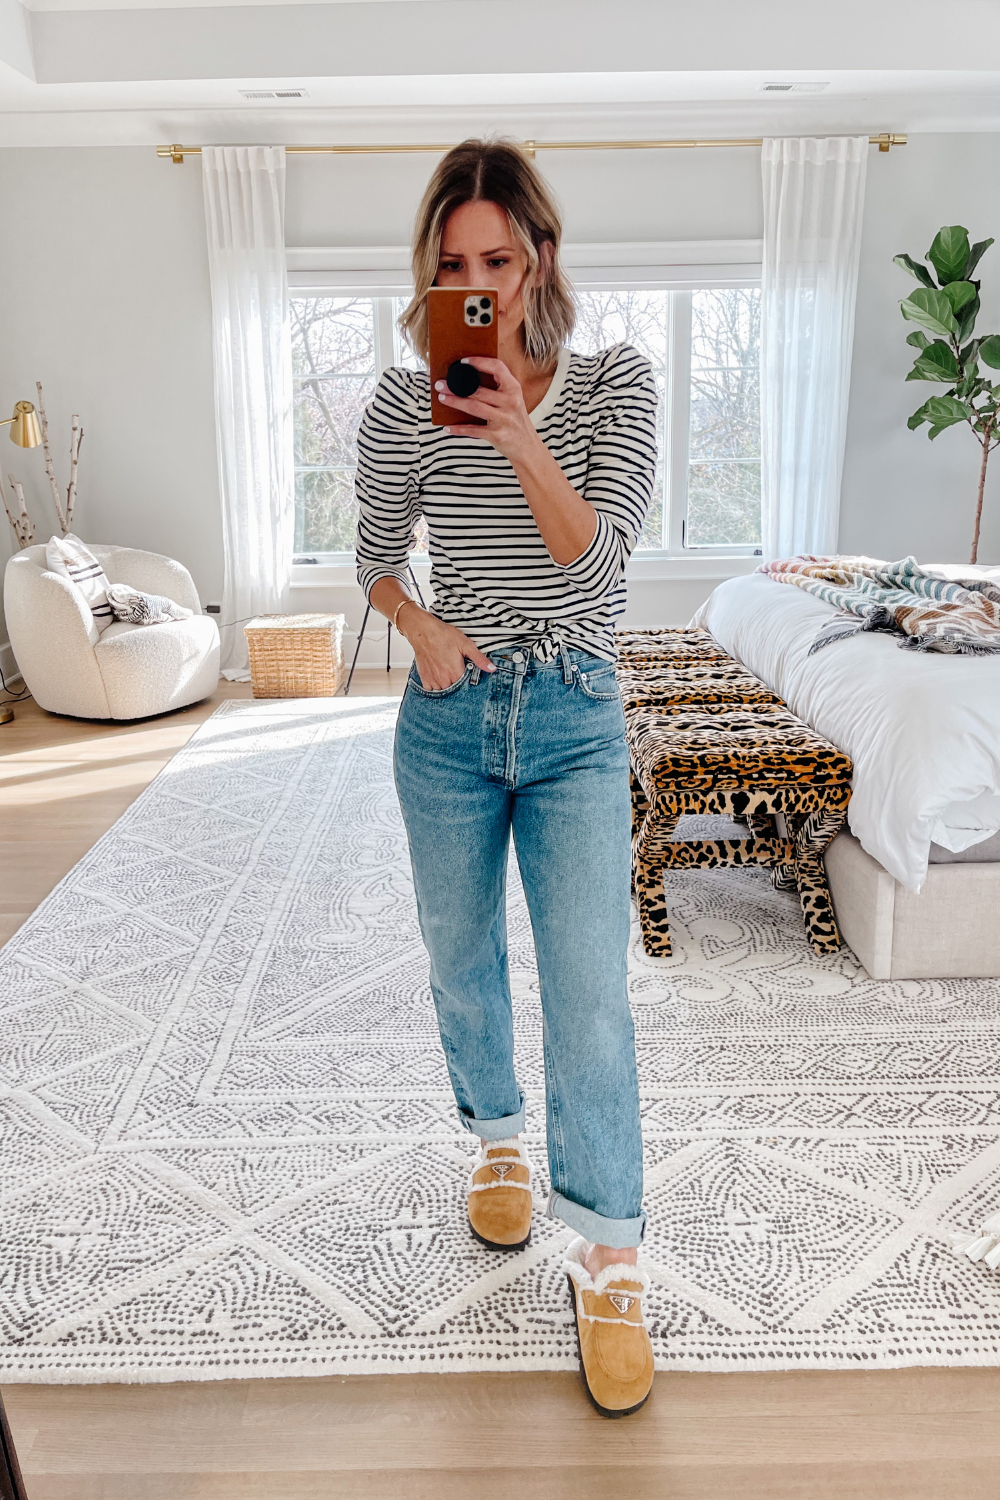 Suzanne wearing a striped puff sleeve top, denim jeans, and Prada slides